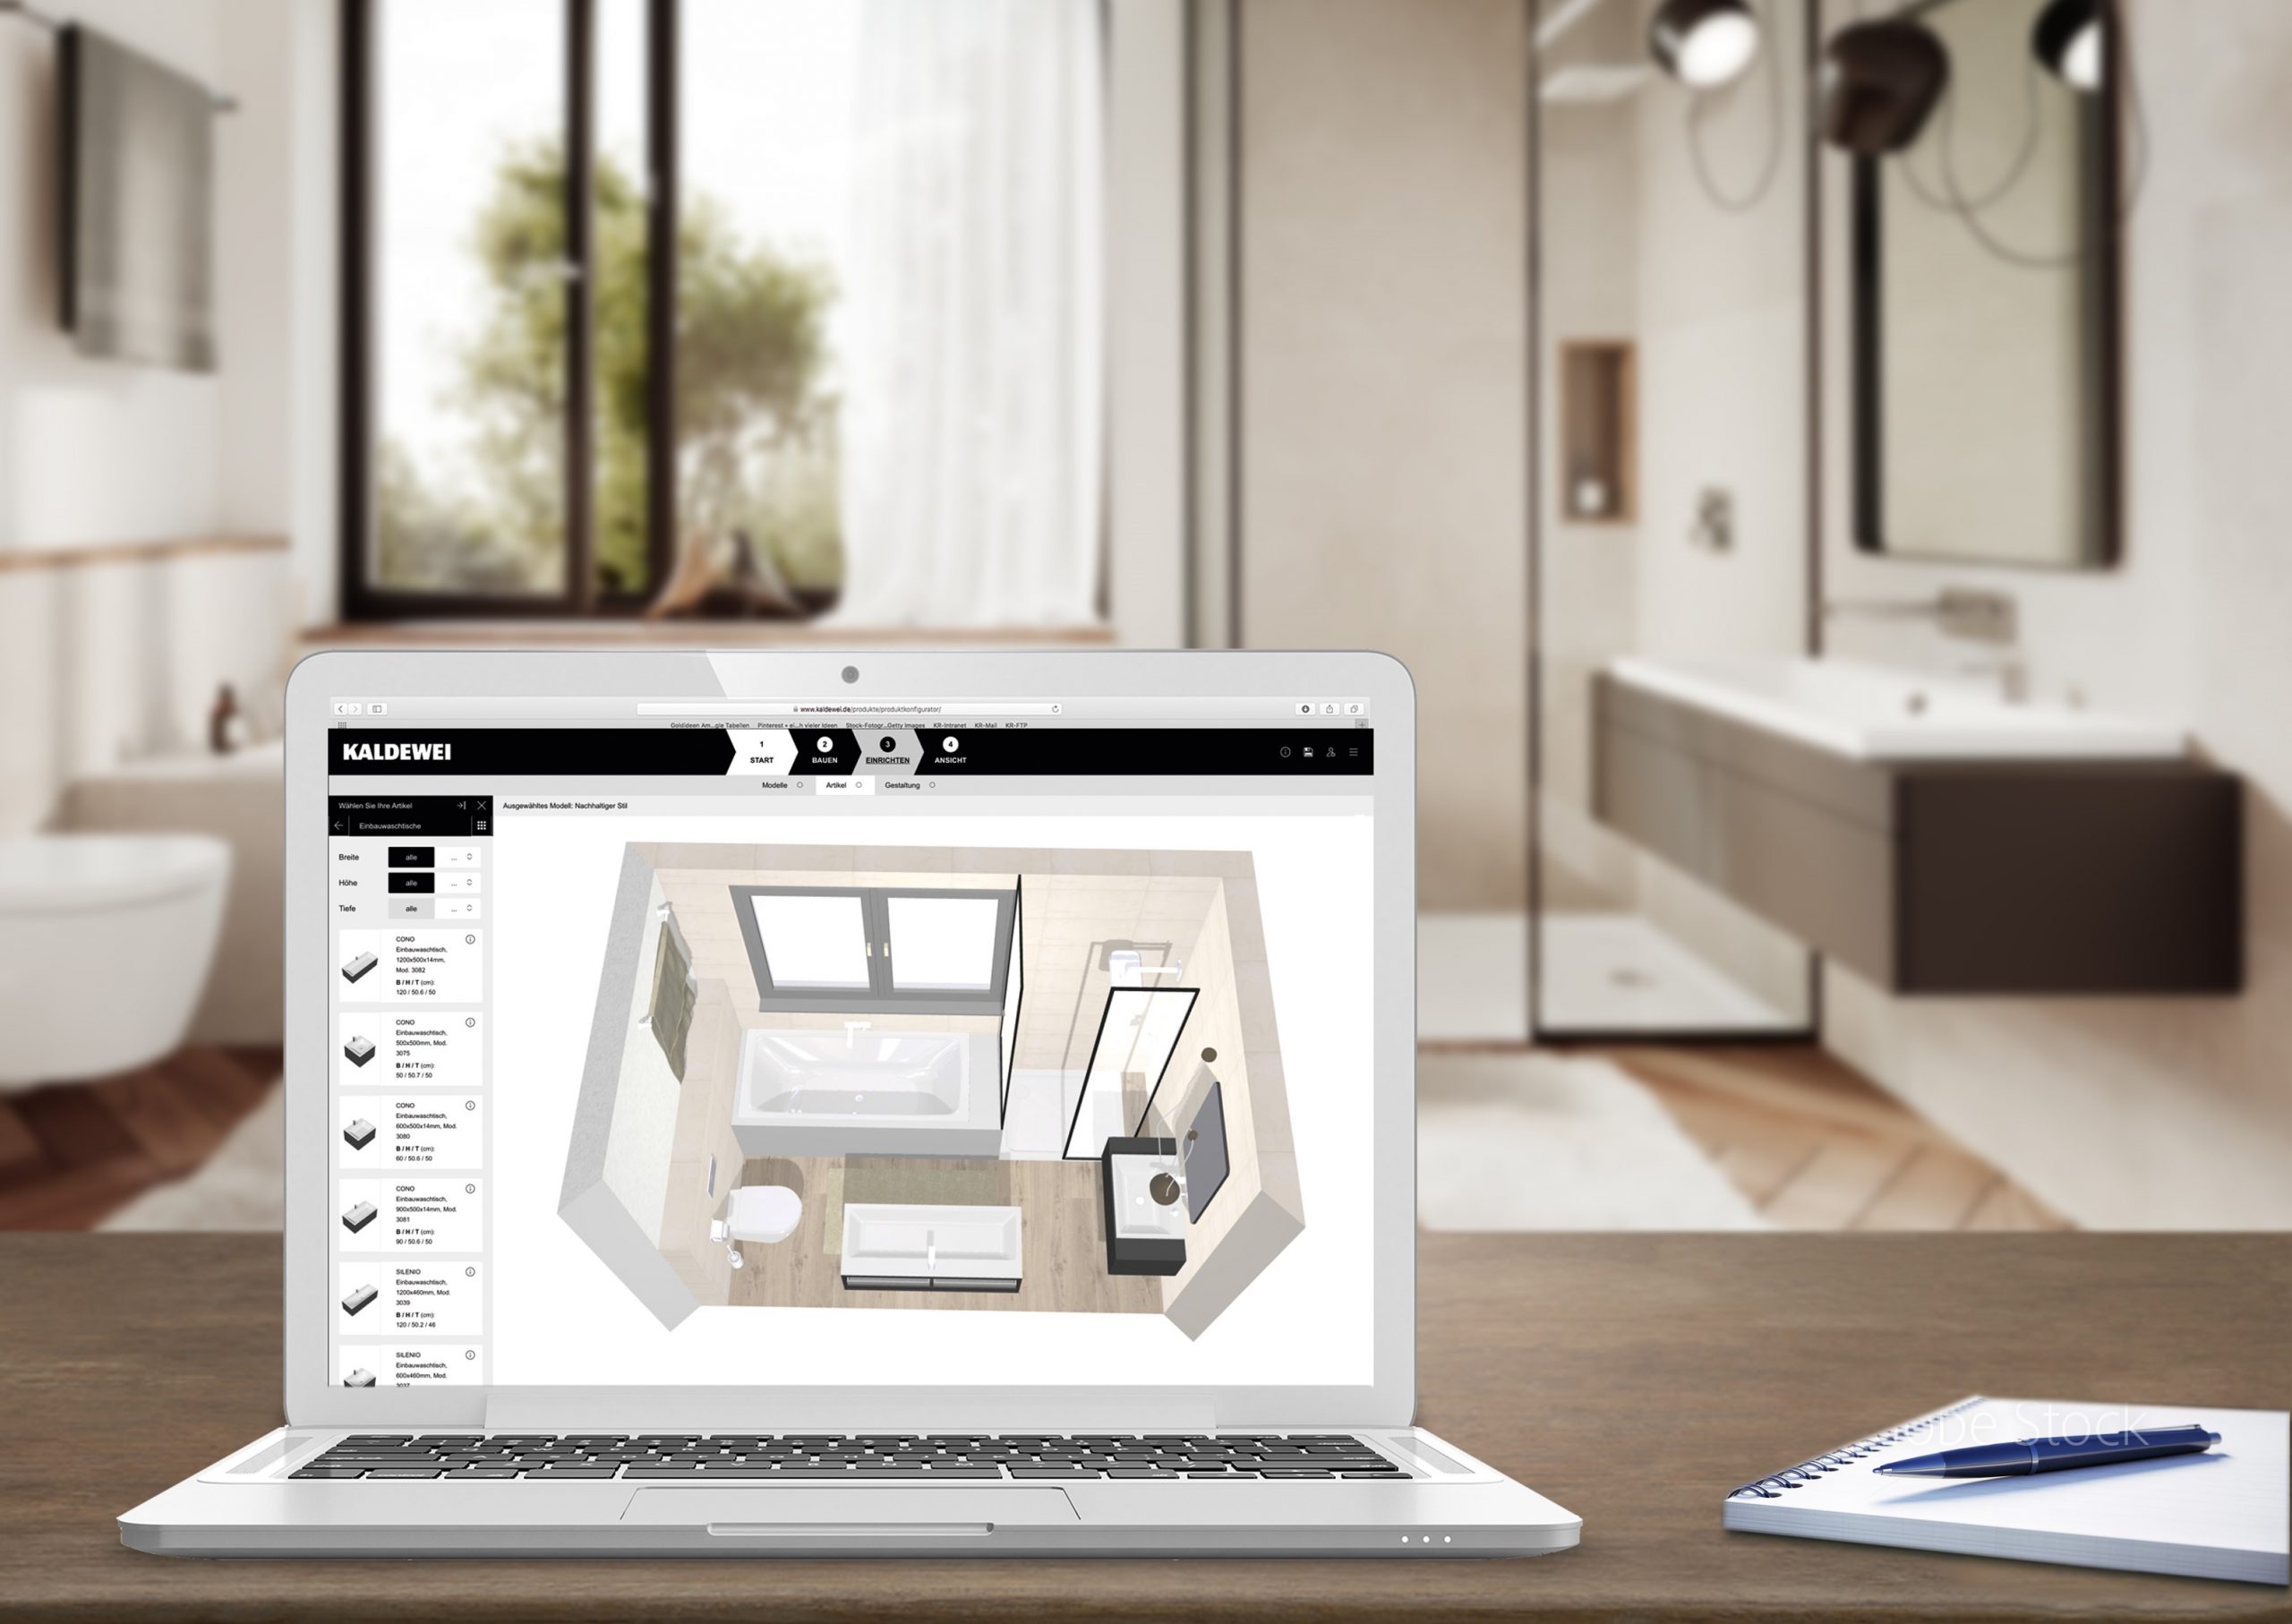 Virtual inspiration for real bathroom dreams – Kaldewei has expanded its digital service for creative online planning